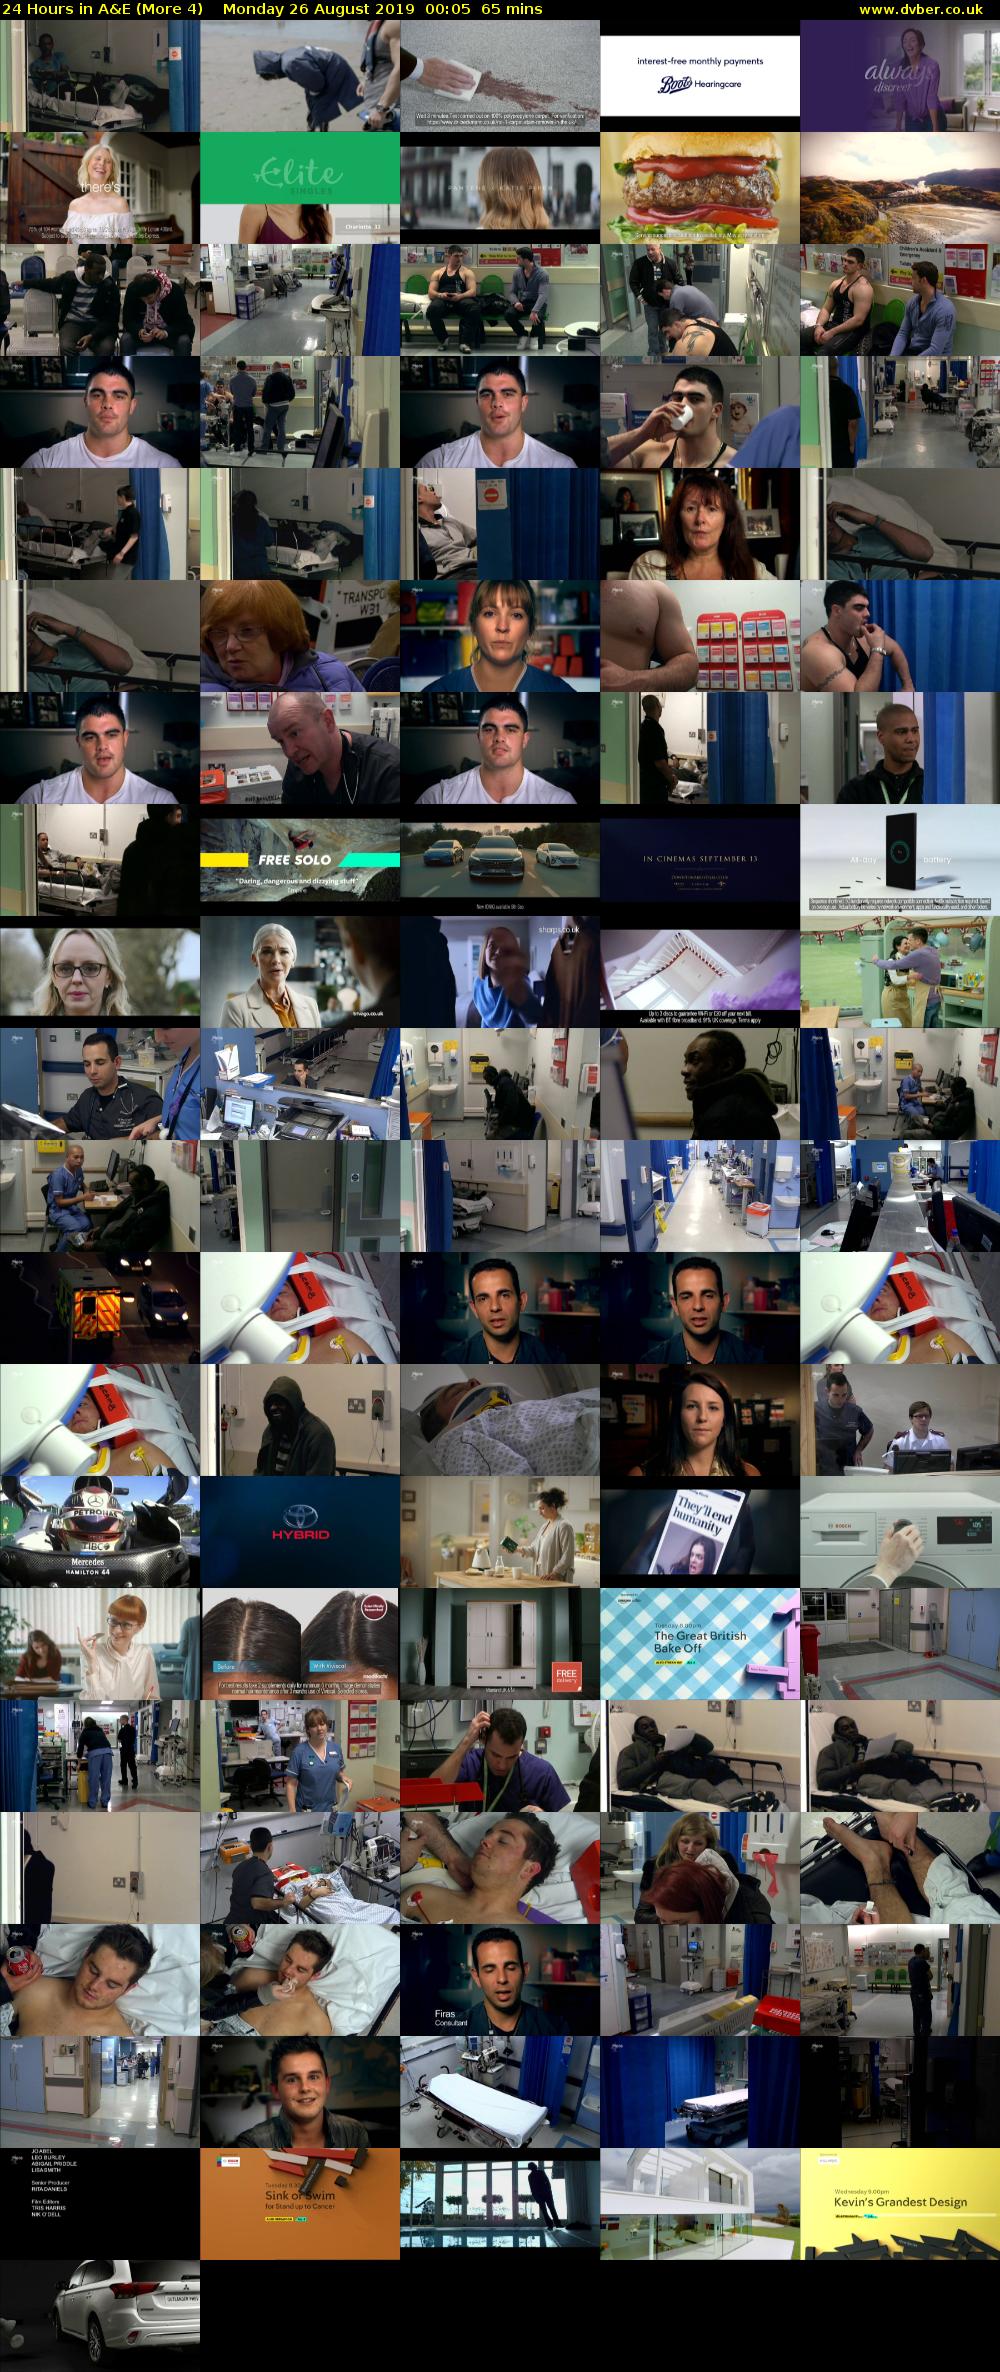 24 Hours in A&E (More 4) Monday 26 August 2019 00:05 - 01:10